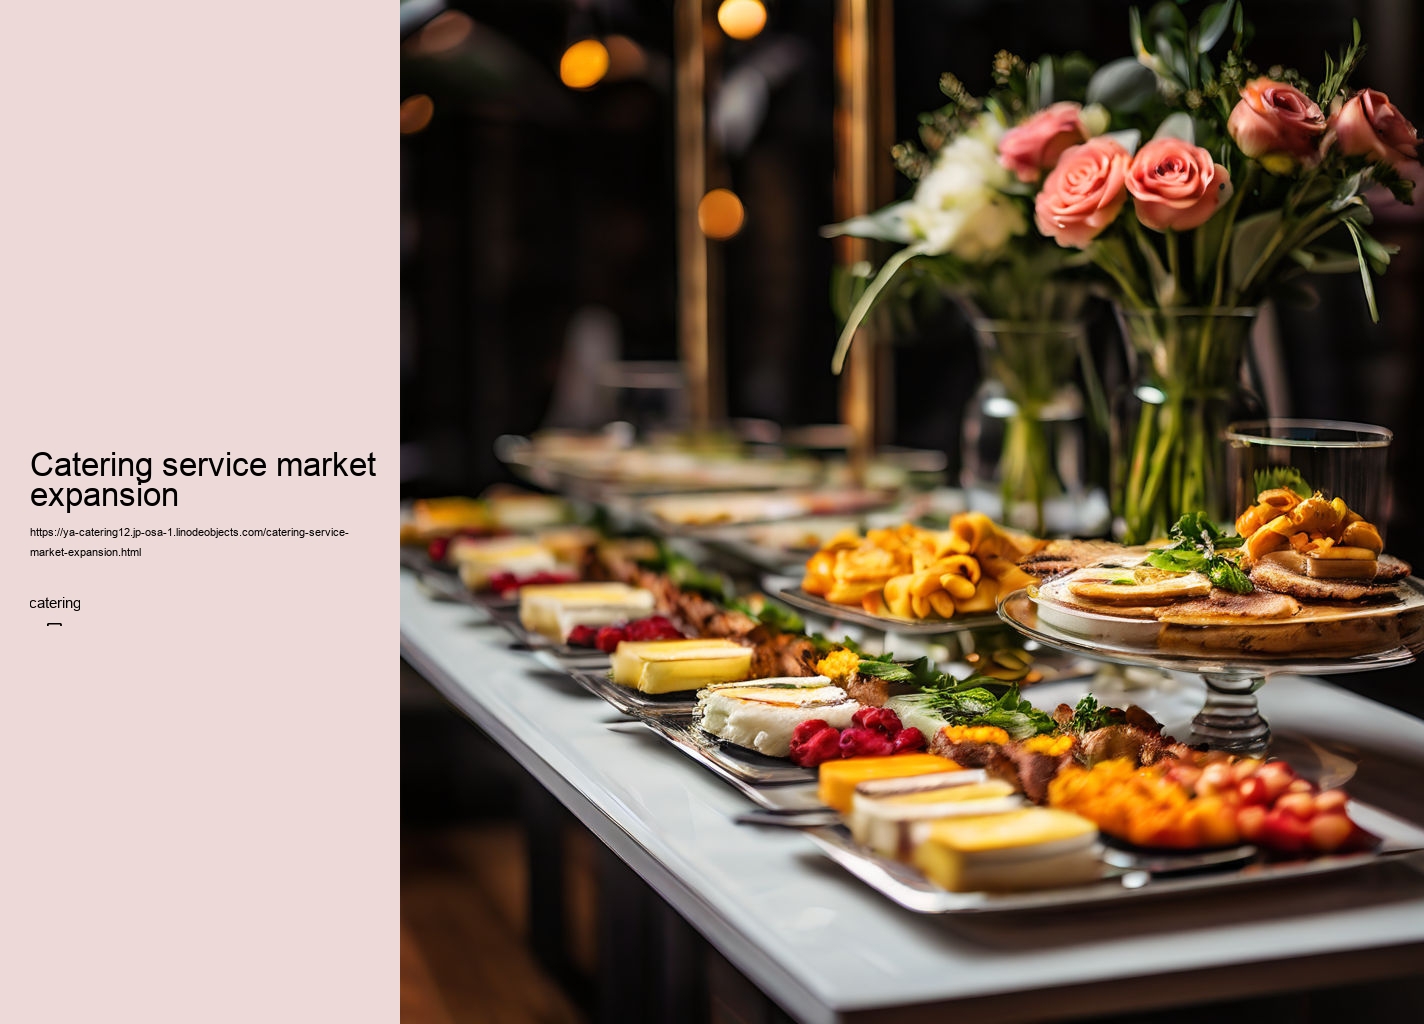 Catering service market expansion